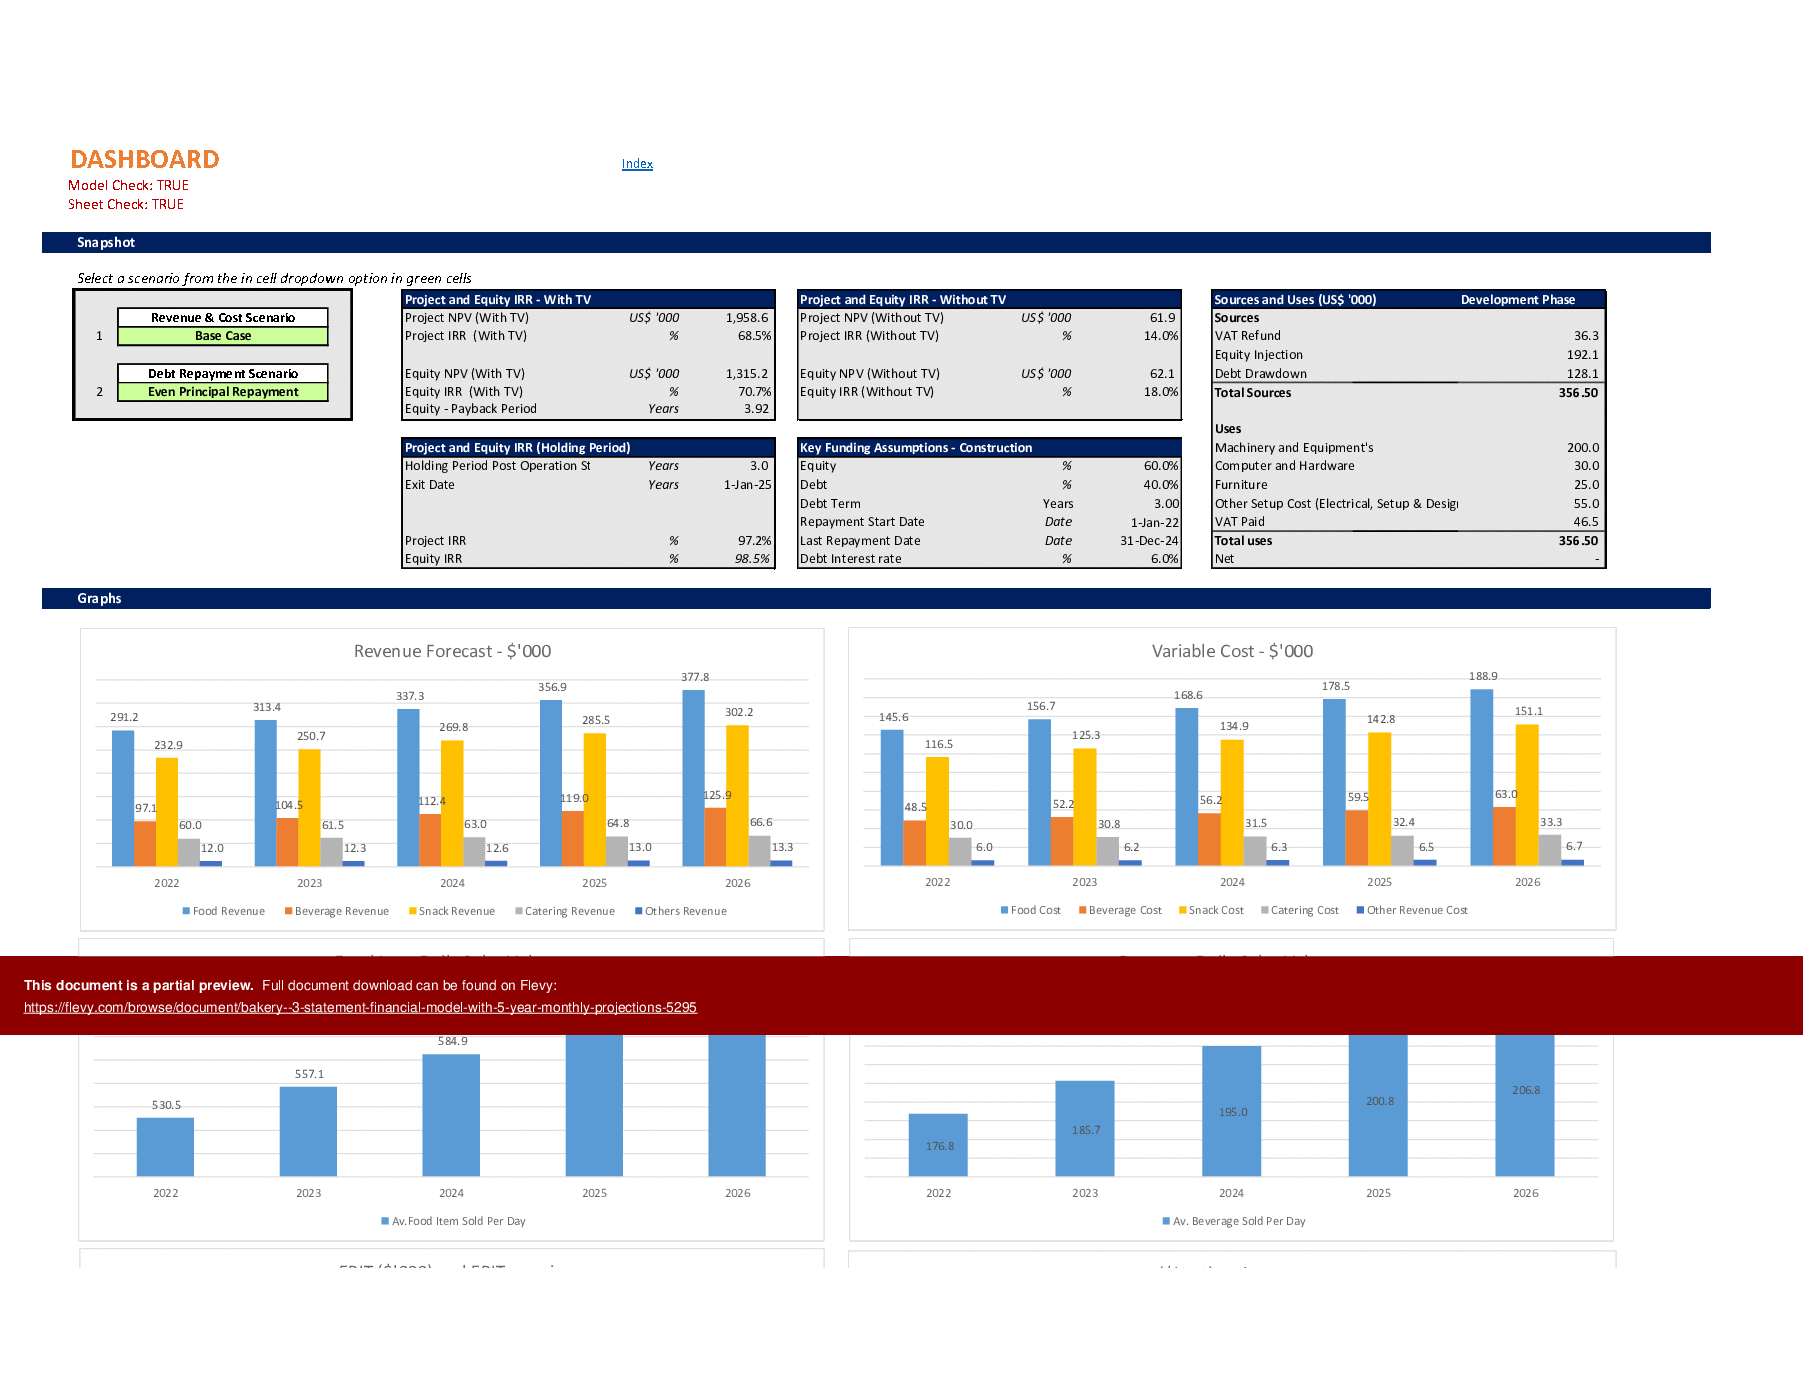 Bakery - 3 Statement Financial Model with 5-Year Monthly Projections (Excel template (XLSM)) Preview Image